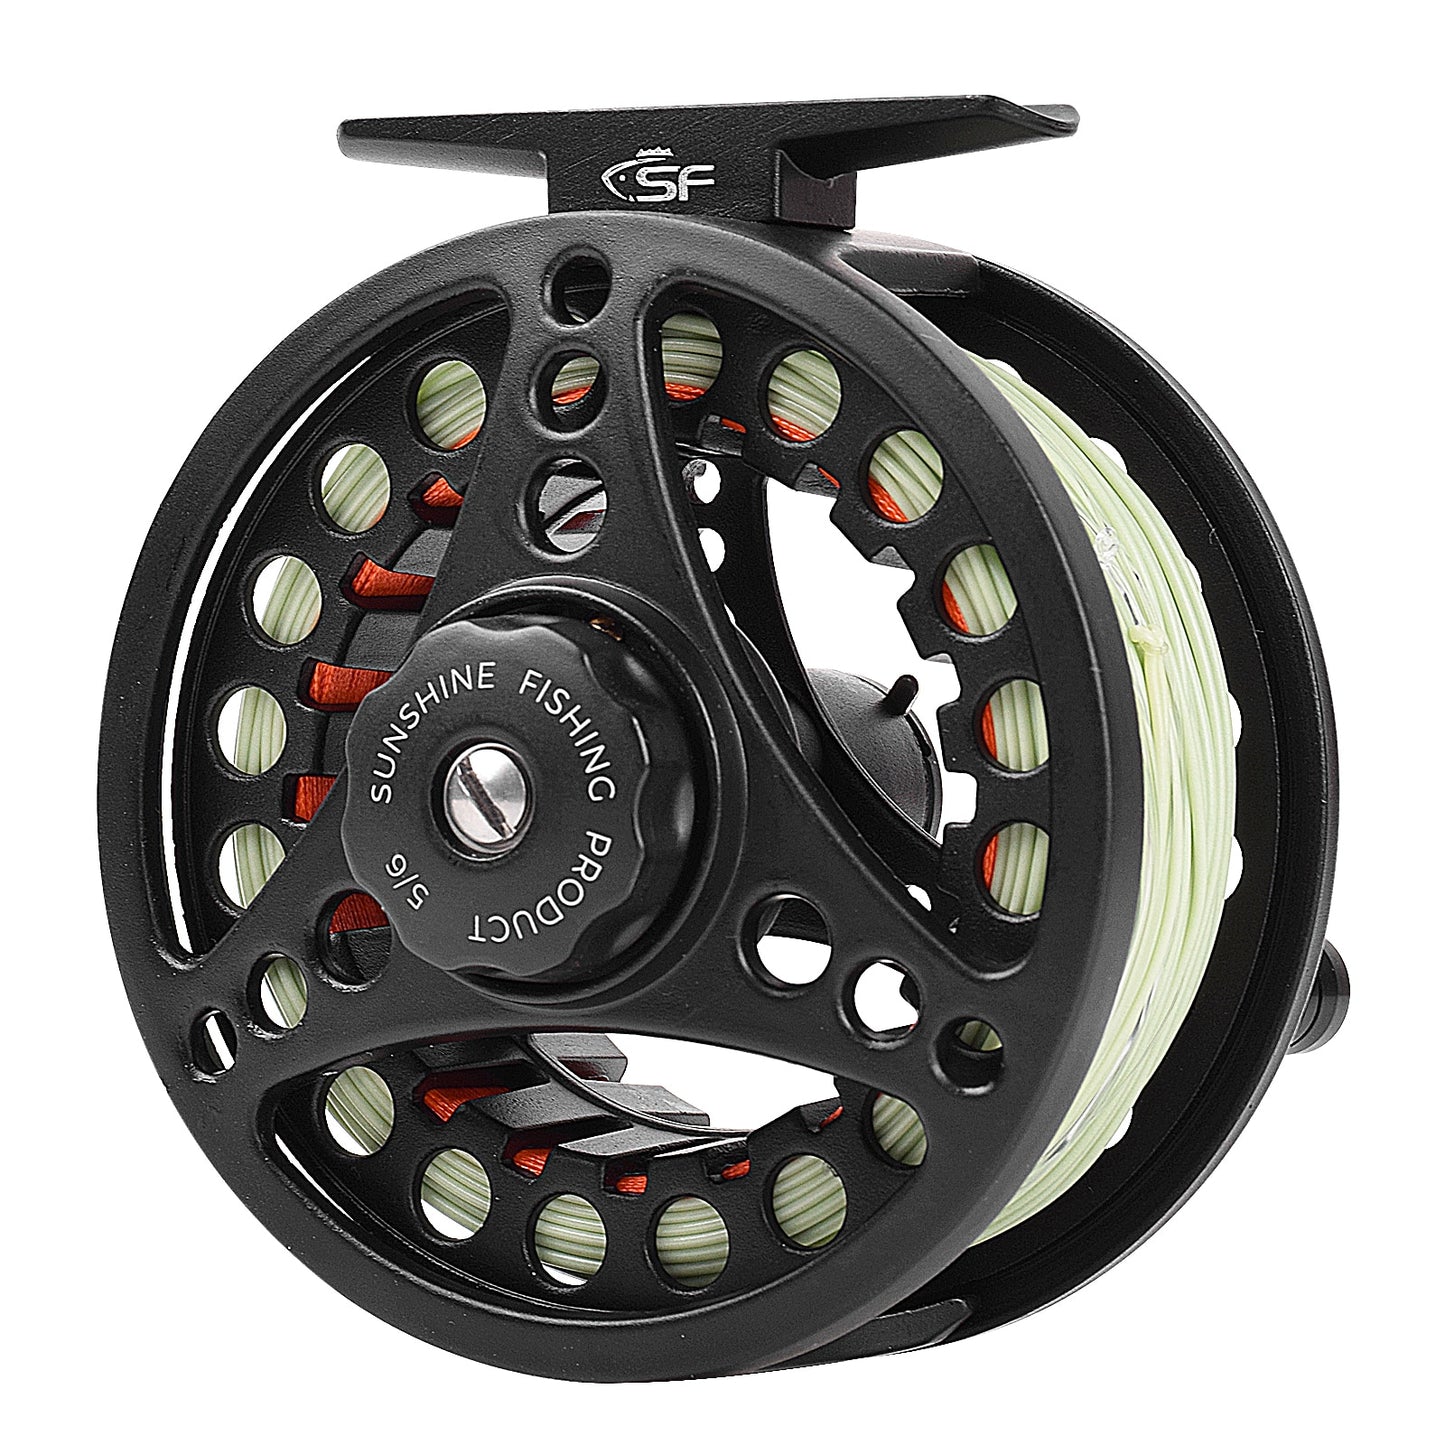 SF Fly Fishing Reel 3/4,5/6,7/8WT Fly Reel Combo Fly Reel Large Arbor Aluminum Alloy Body for Trout Bass Carp Pike Panfish